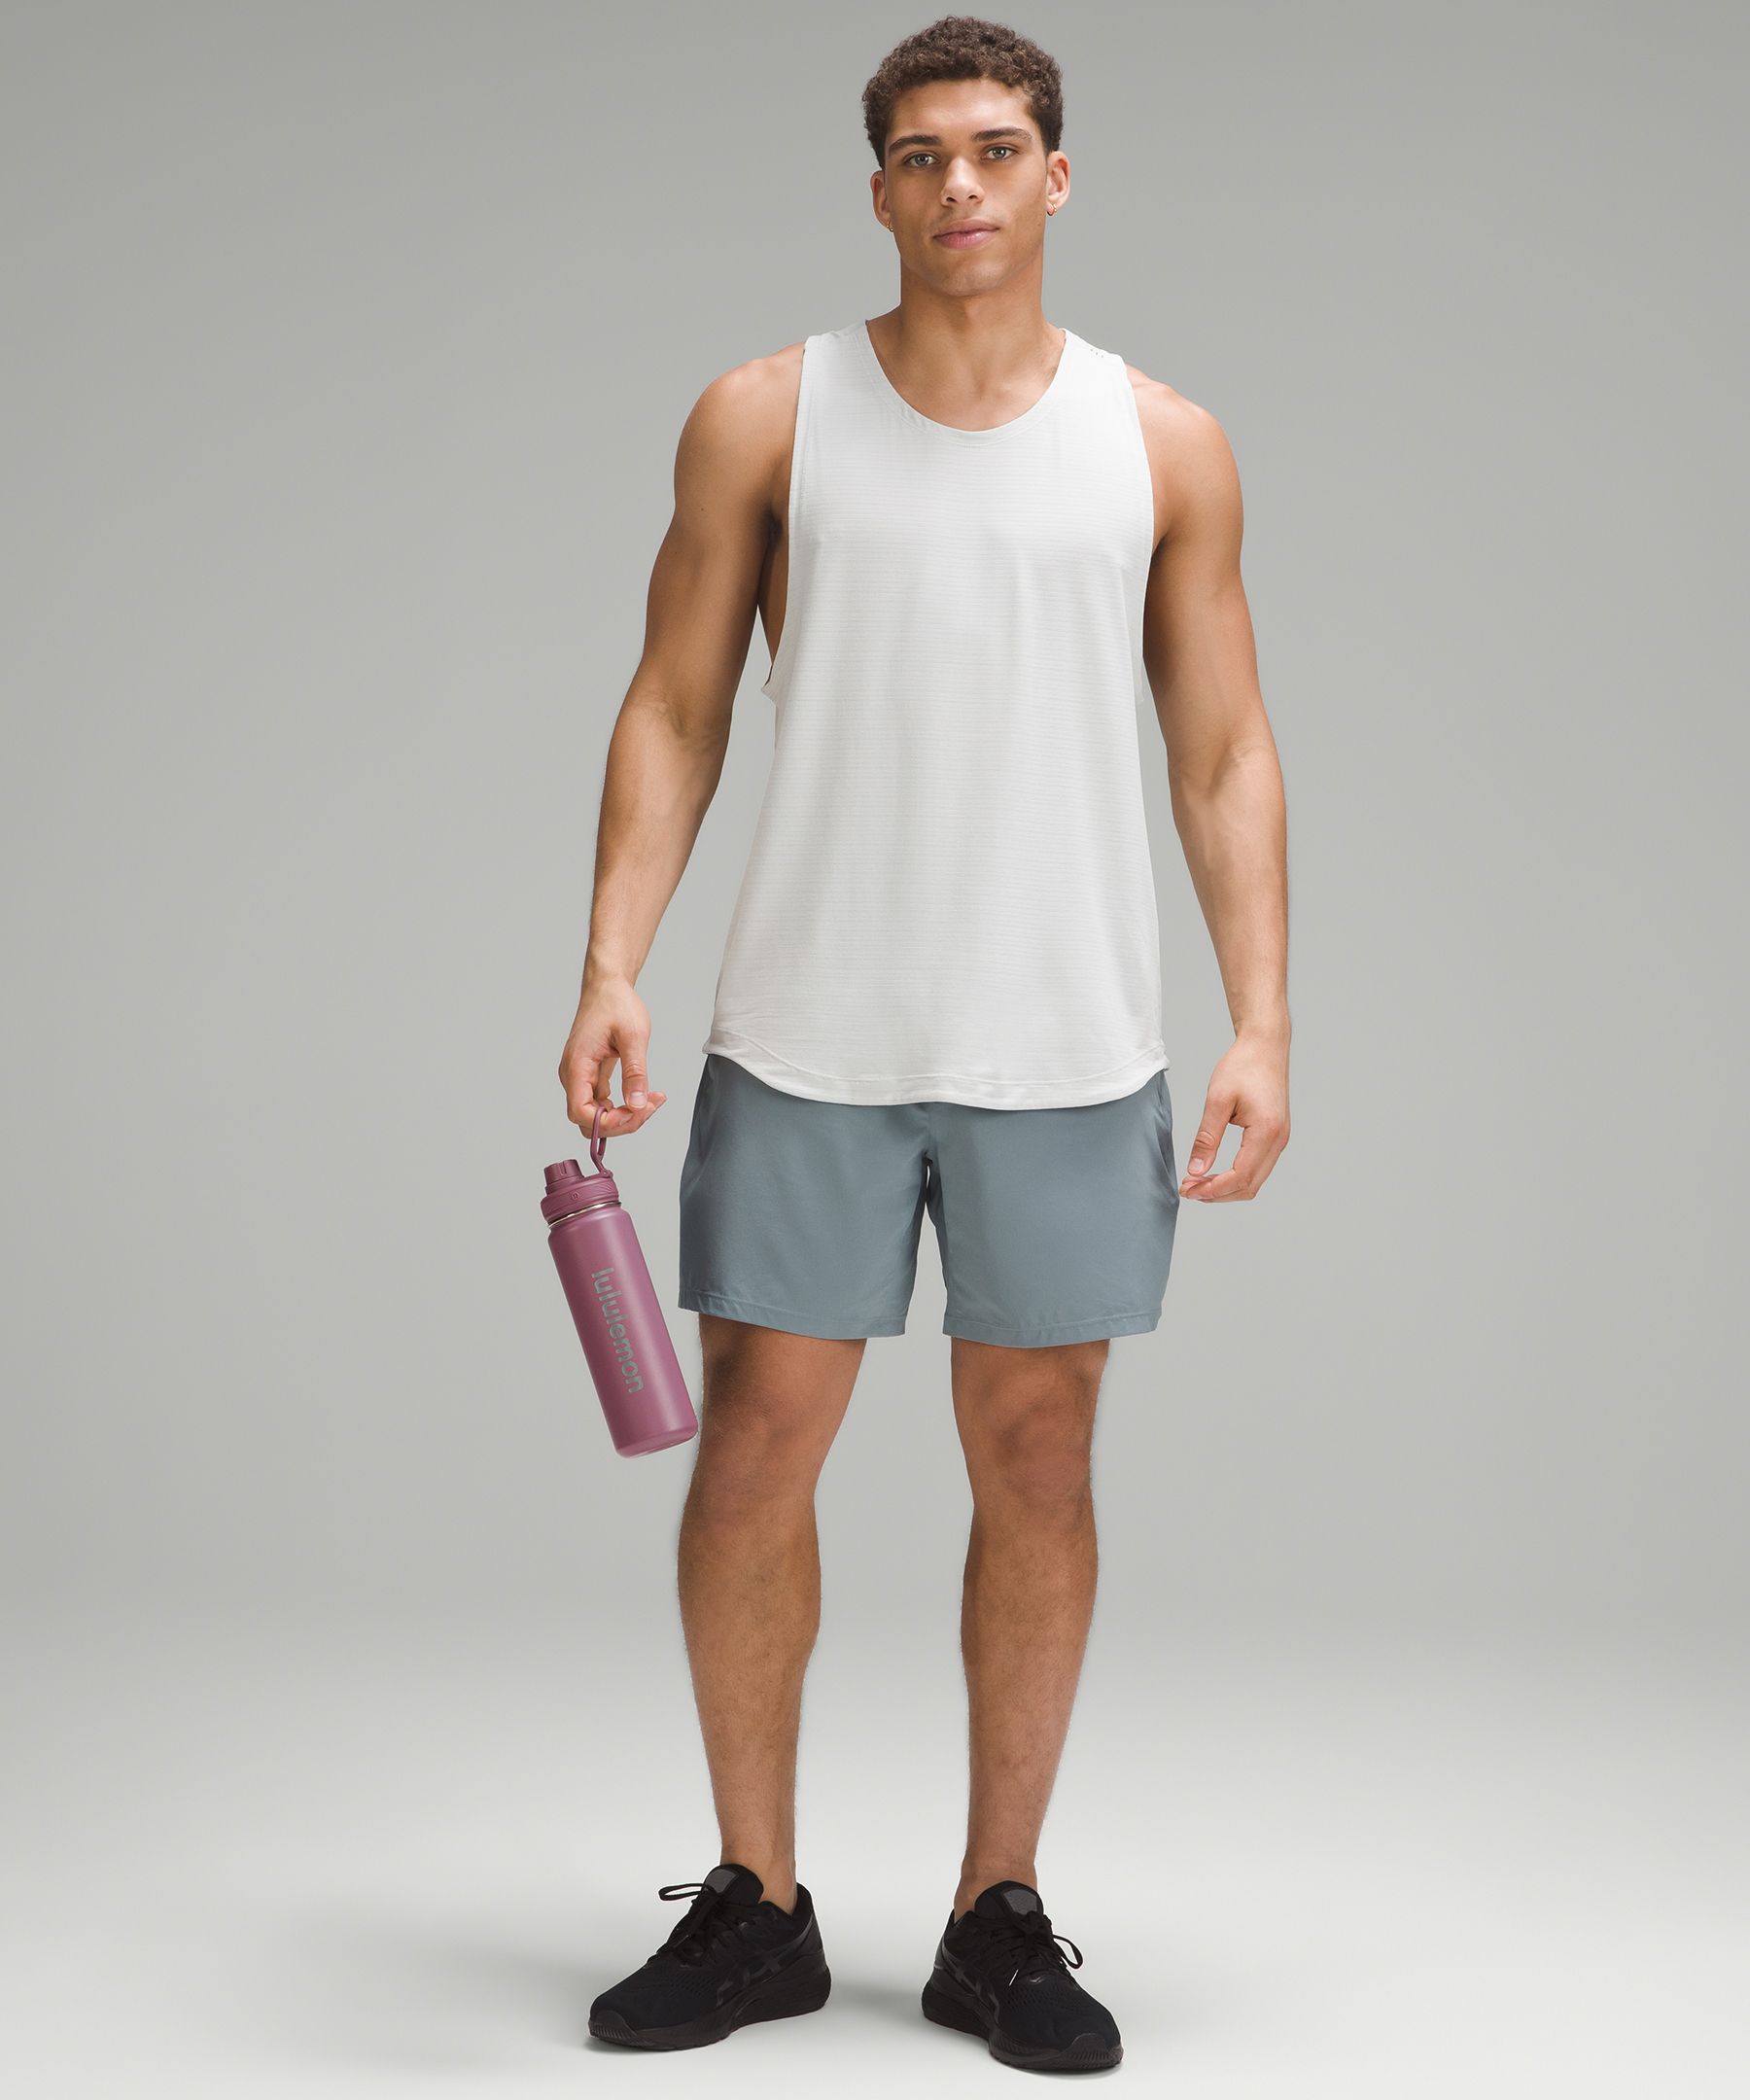 Back to Life Sport Bottle 32oz, Unisex Work Out Accessories, lululemon